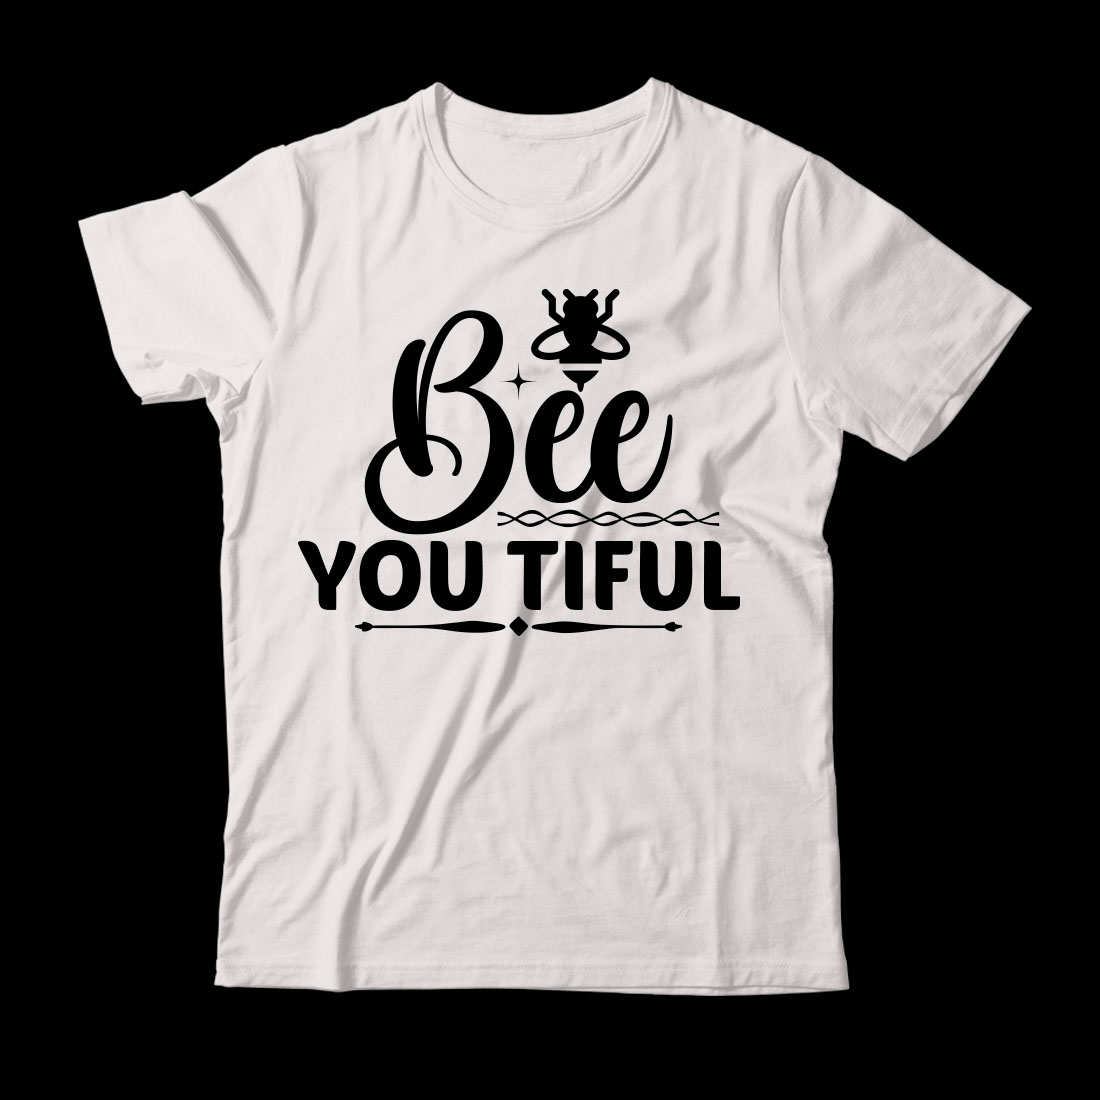 White t - shirt that says bee you tiful.